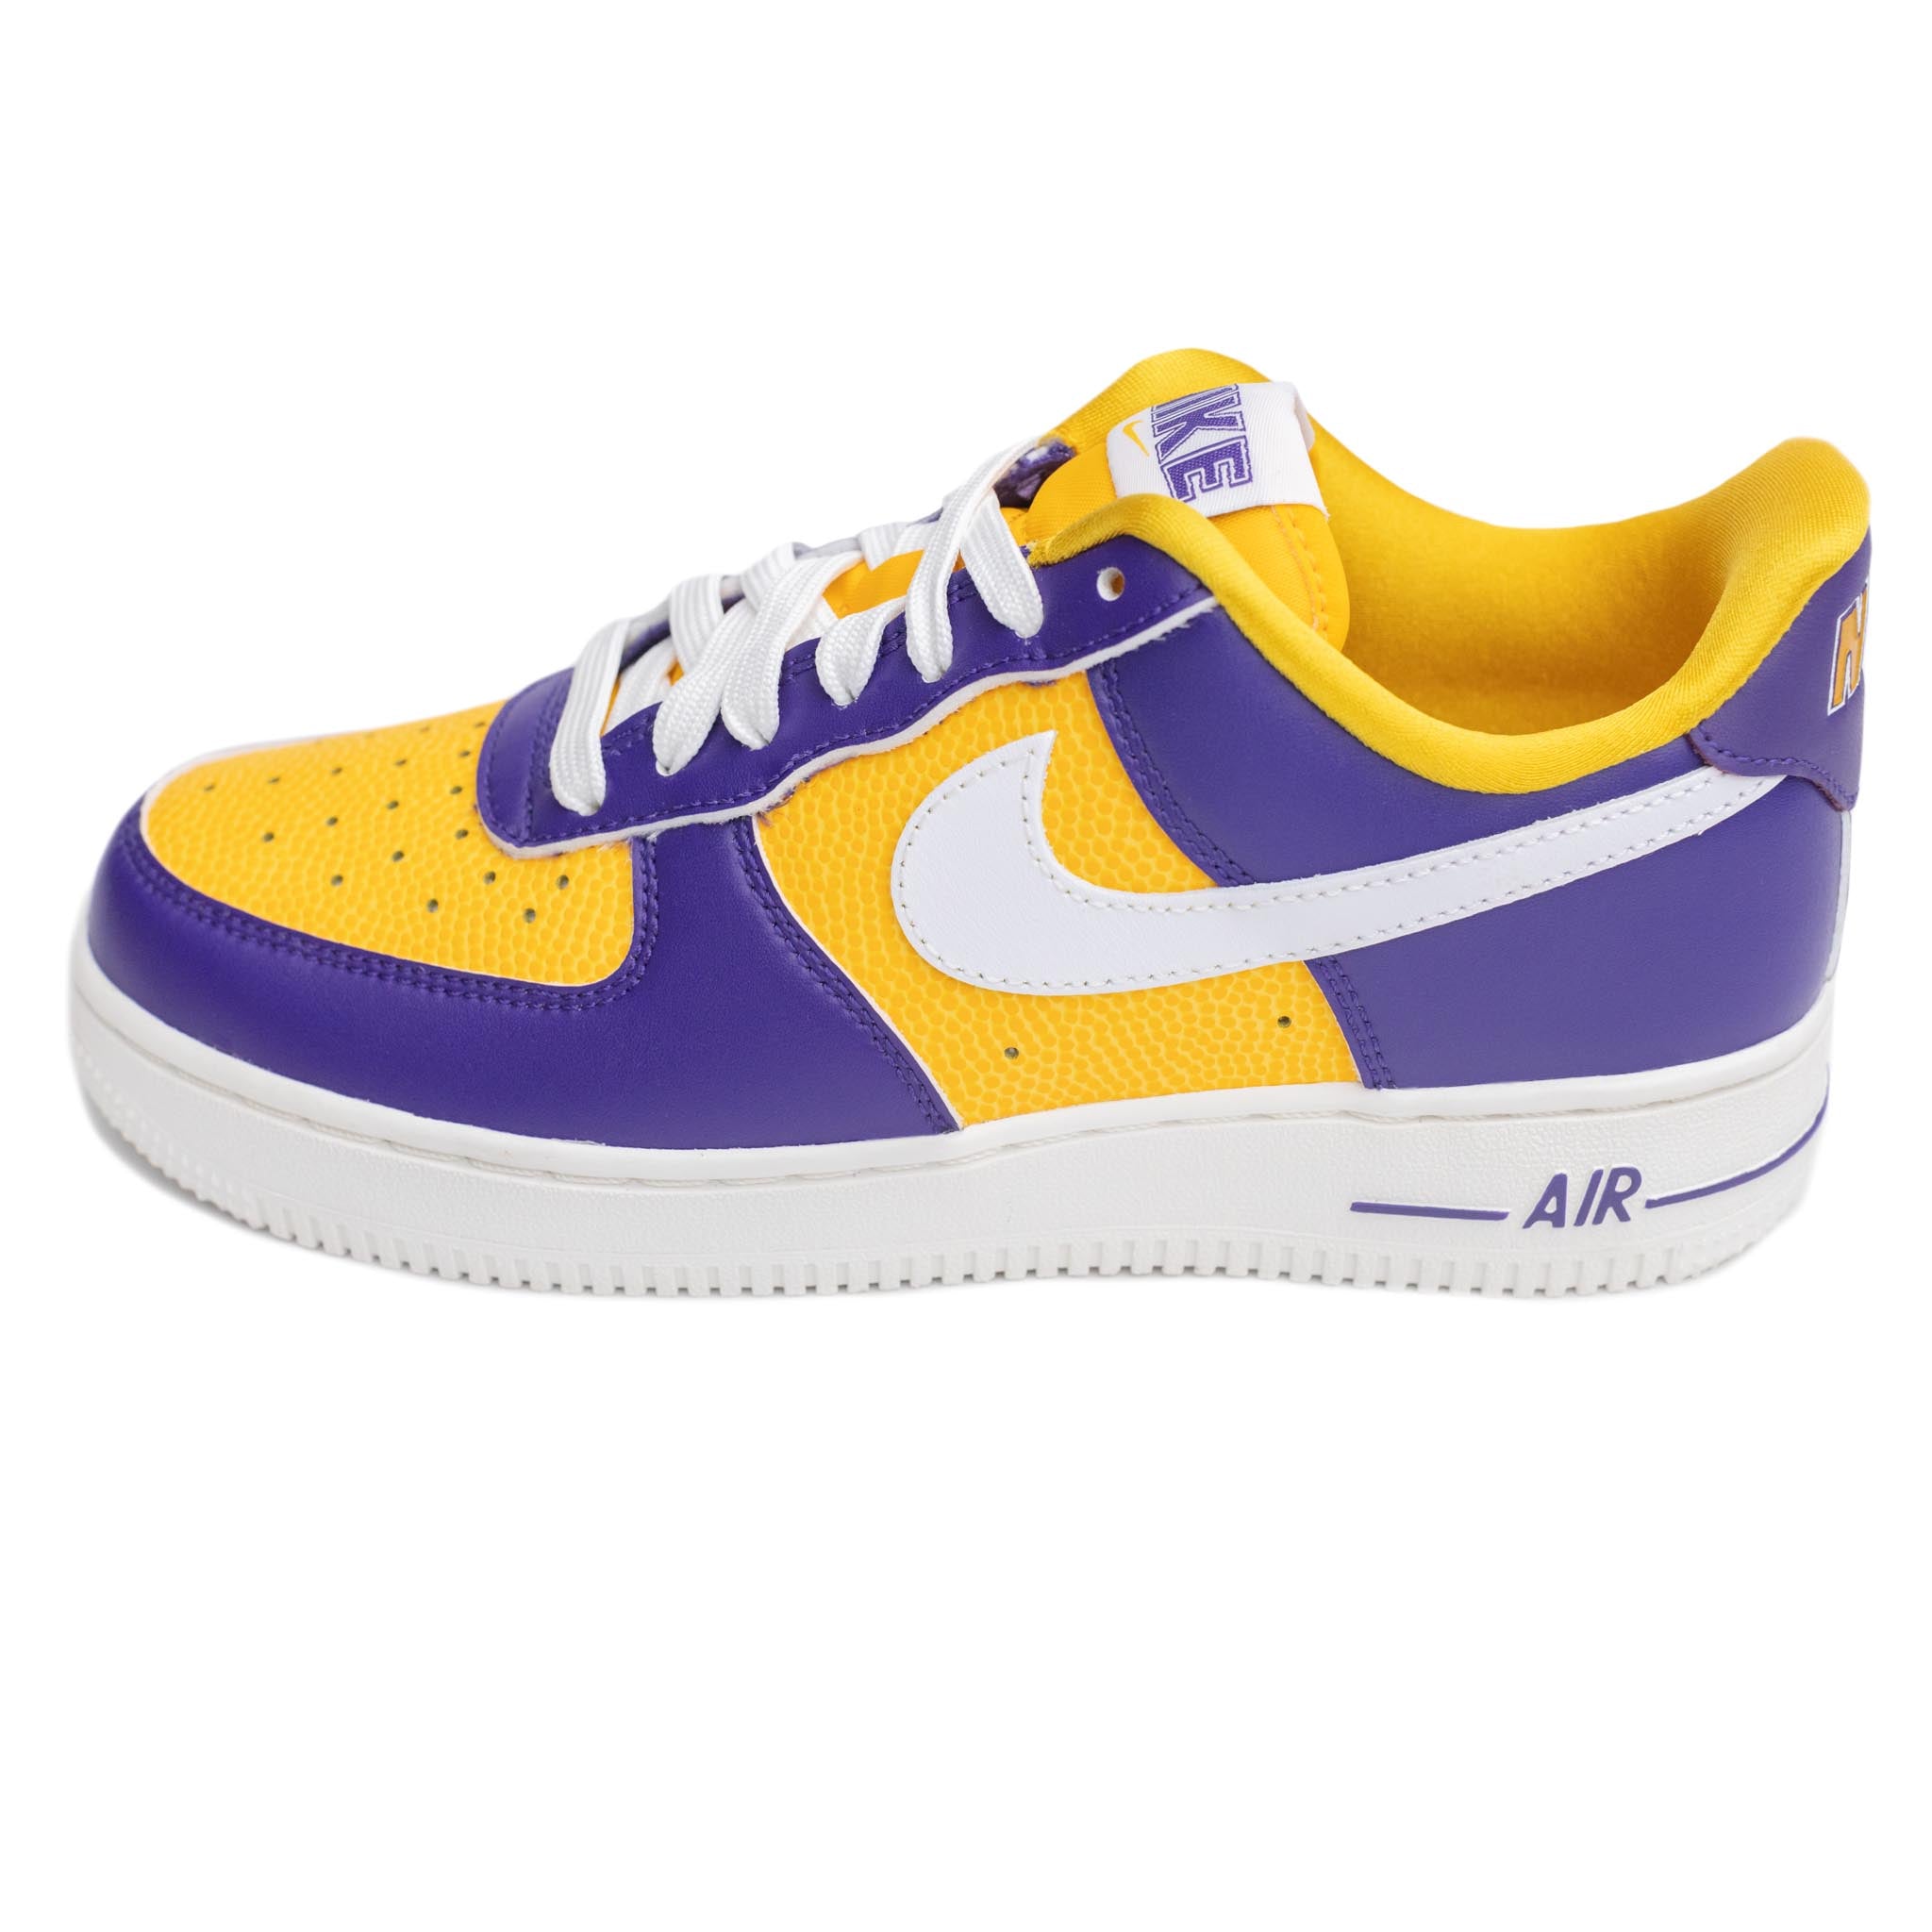 Nike Air Force 1 '07 SE 'Be True to Her School LSU'